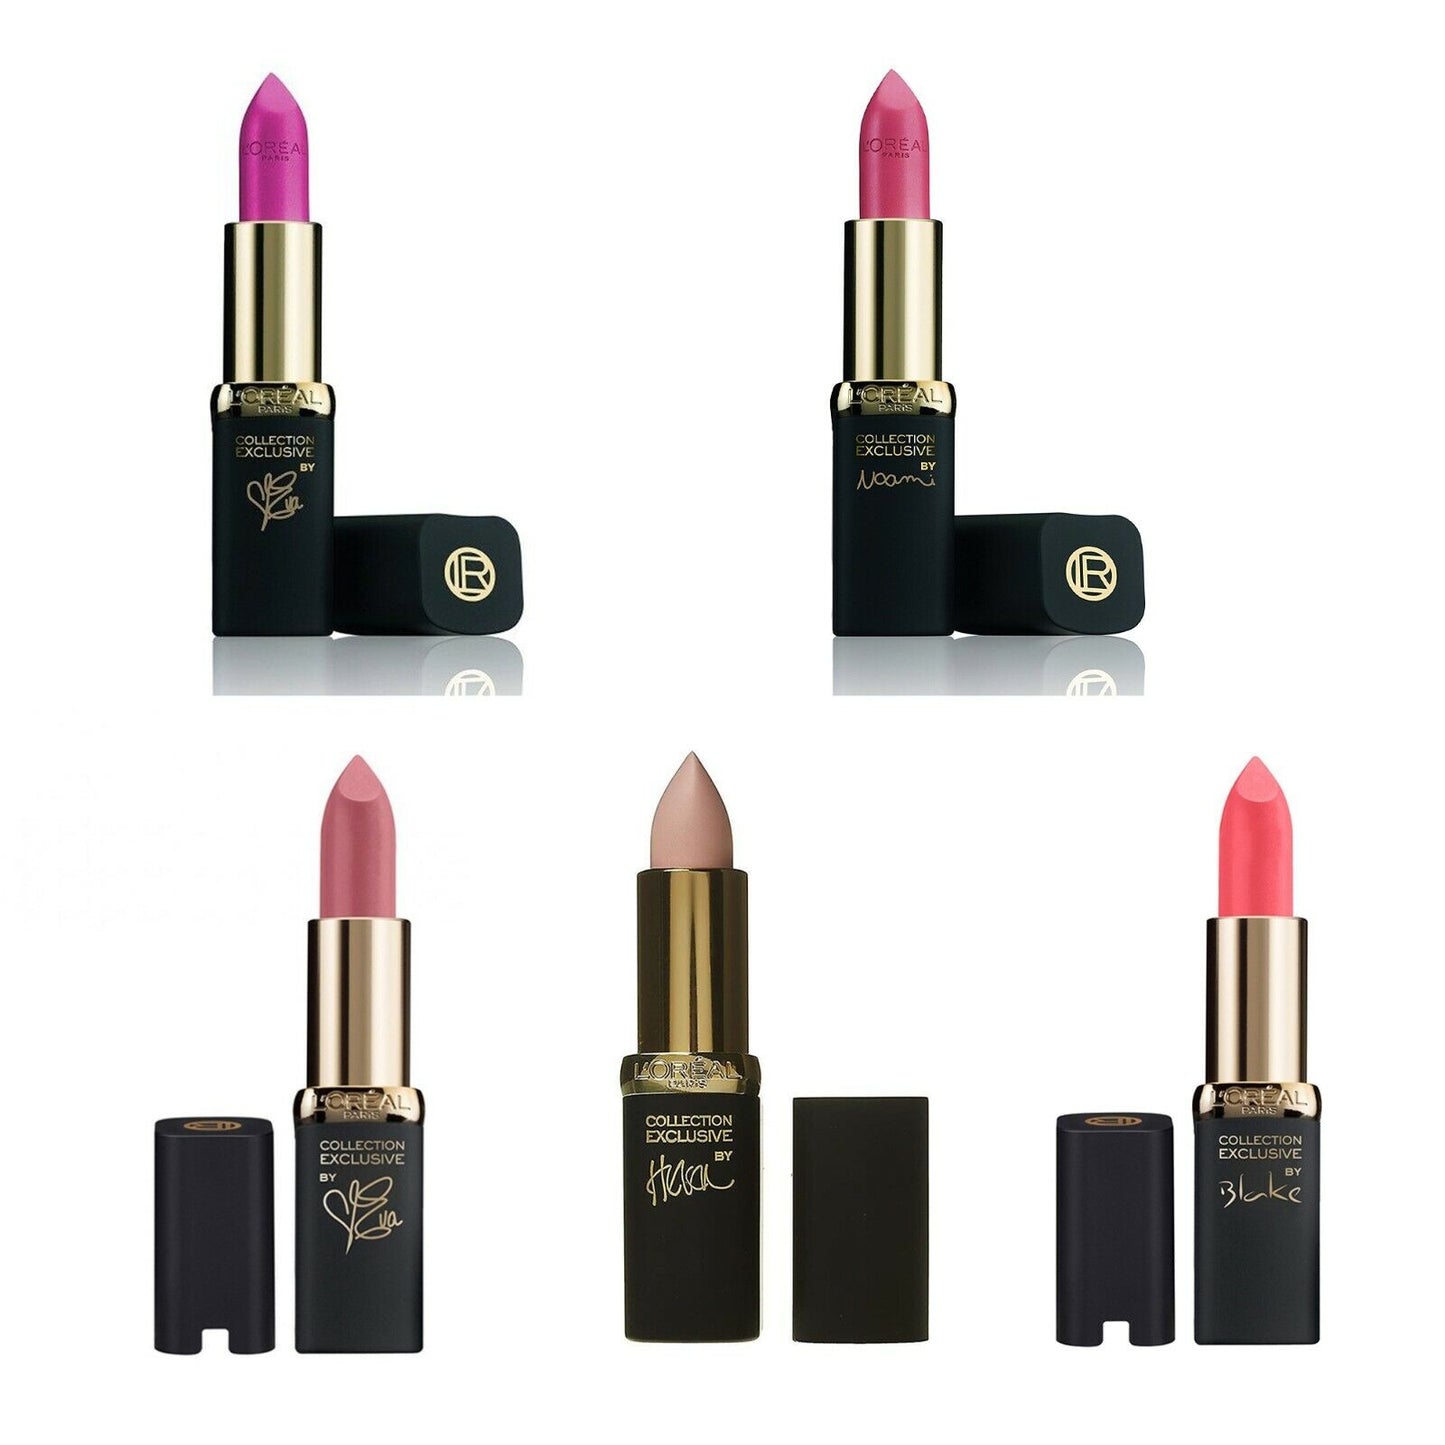 L'Oréal Collection Exclusive Lipstick Delicate Rose  - Choose Your Shade